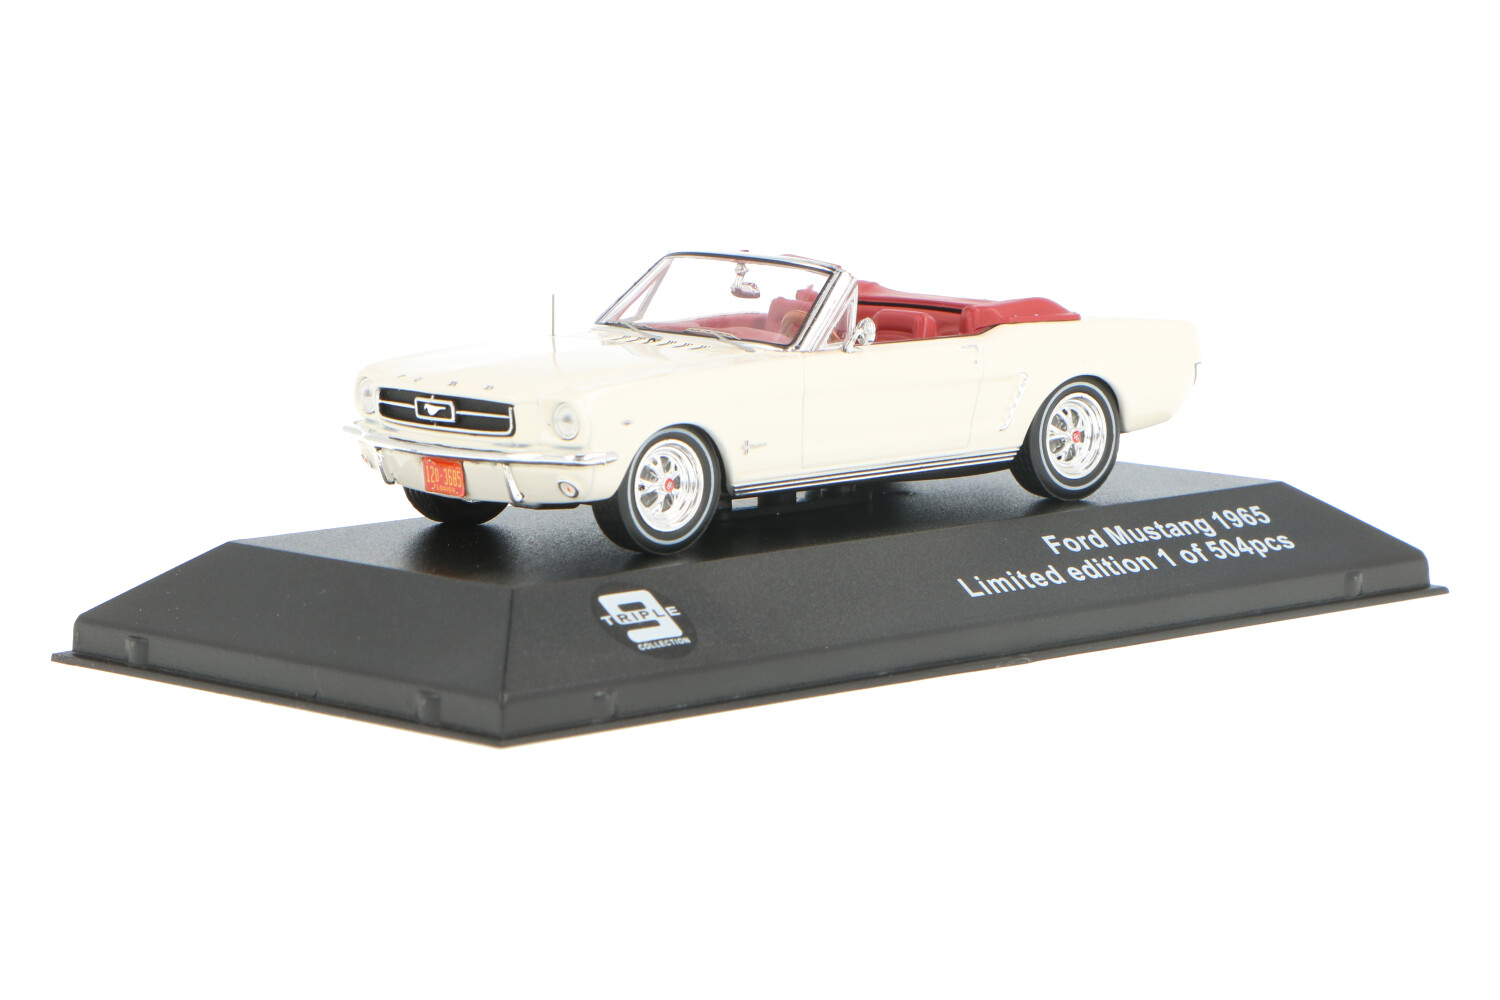 Ford-Mustang-T9-43012_13159580015701402Ford-Mustang-T9-43012_Houseofmodelcars_.jpg